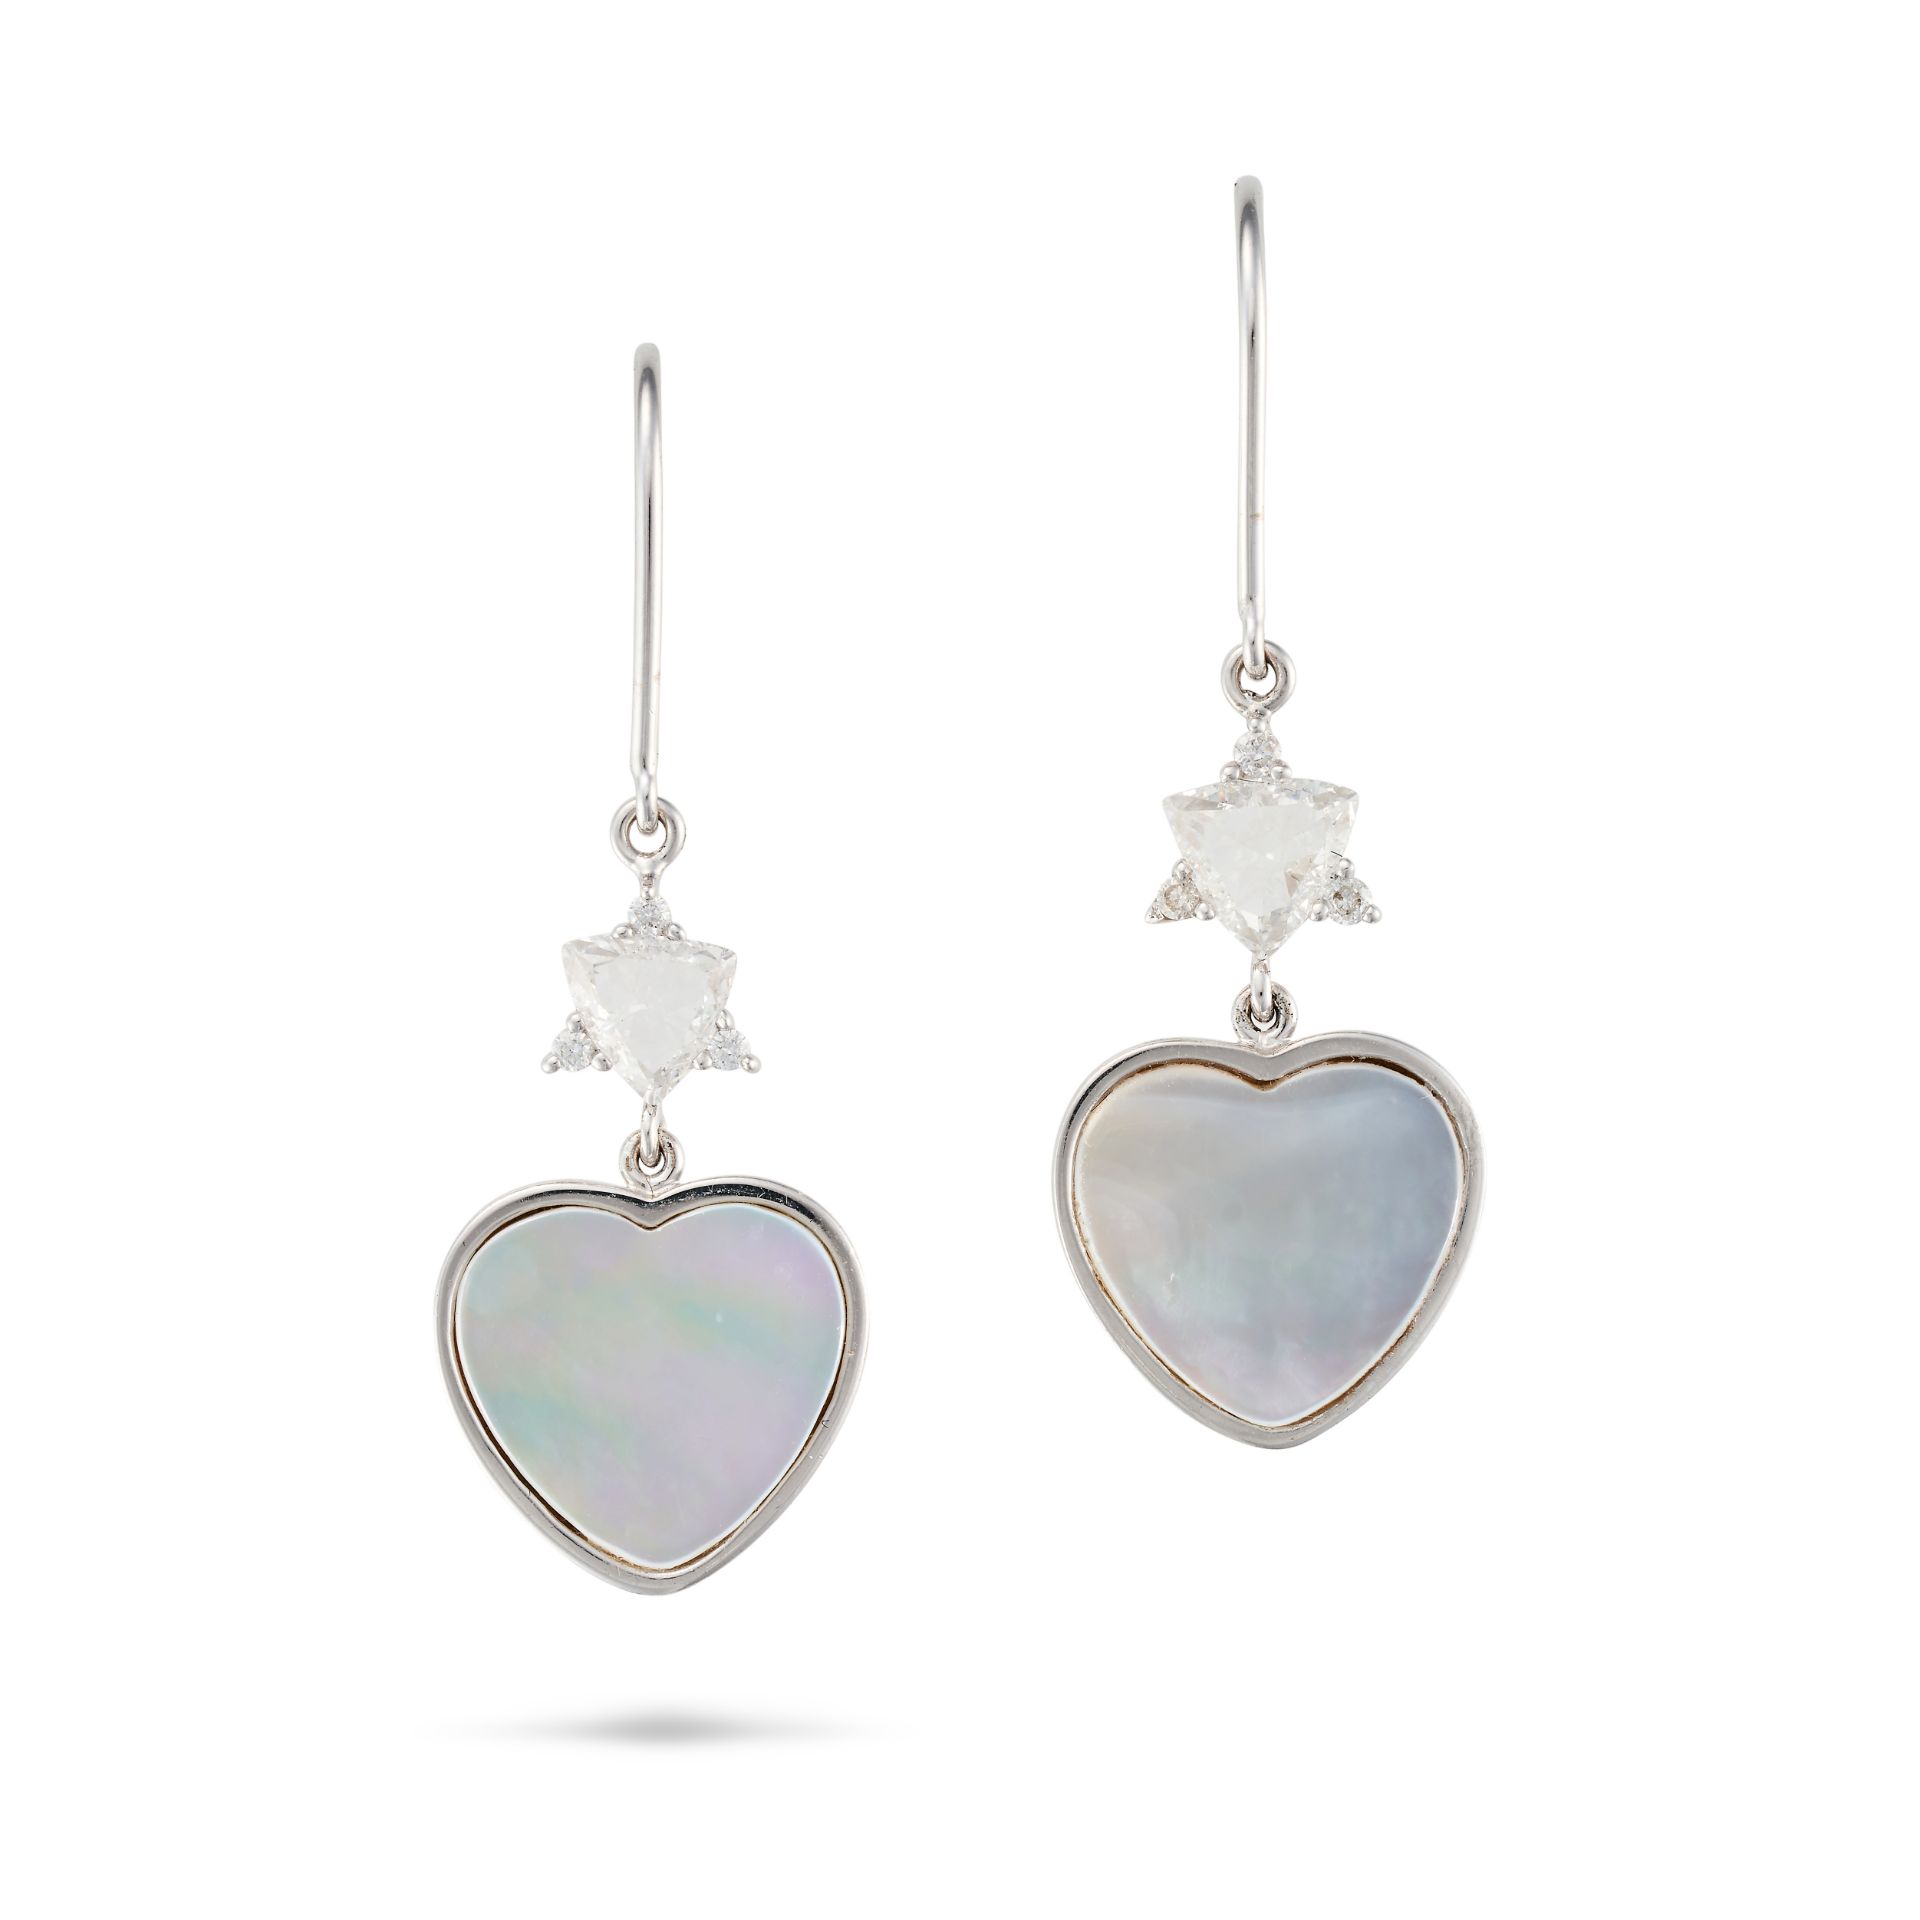 A PAIR OF MOTHER OF PEARL AND DIAMOND HEART DROP EARRINGS each set with a trillion cut diamond ac...